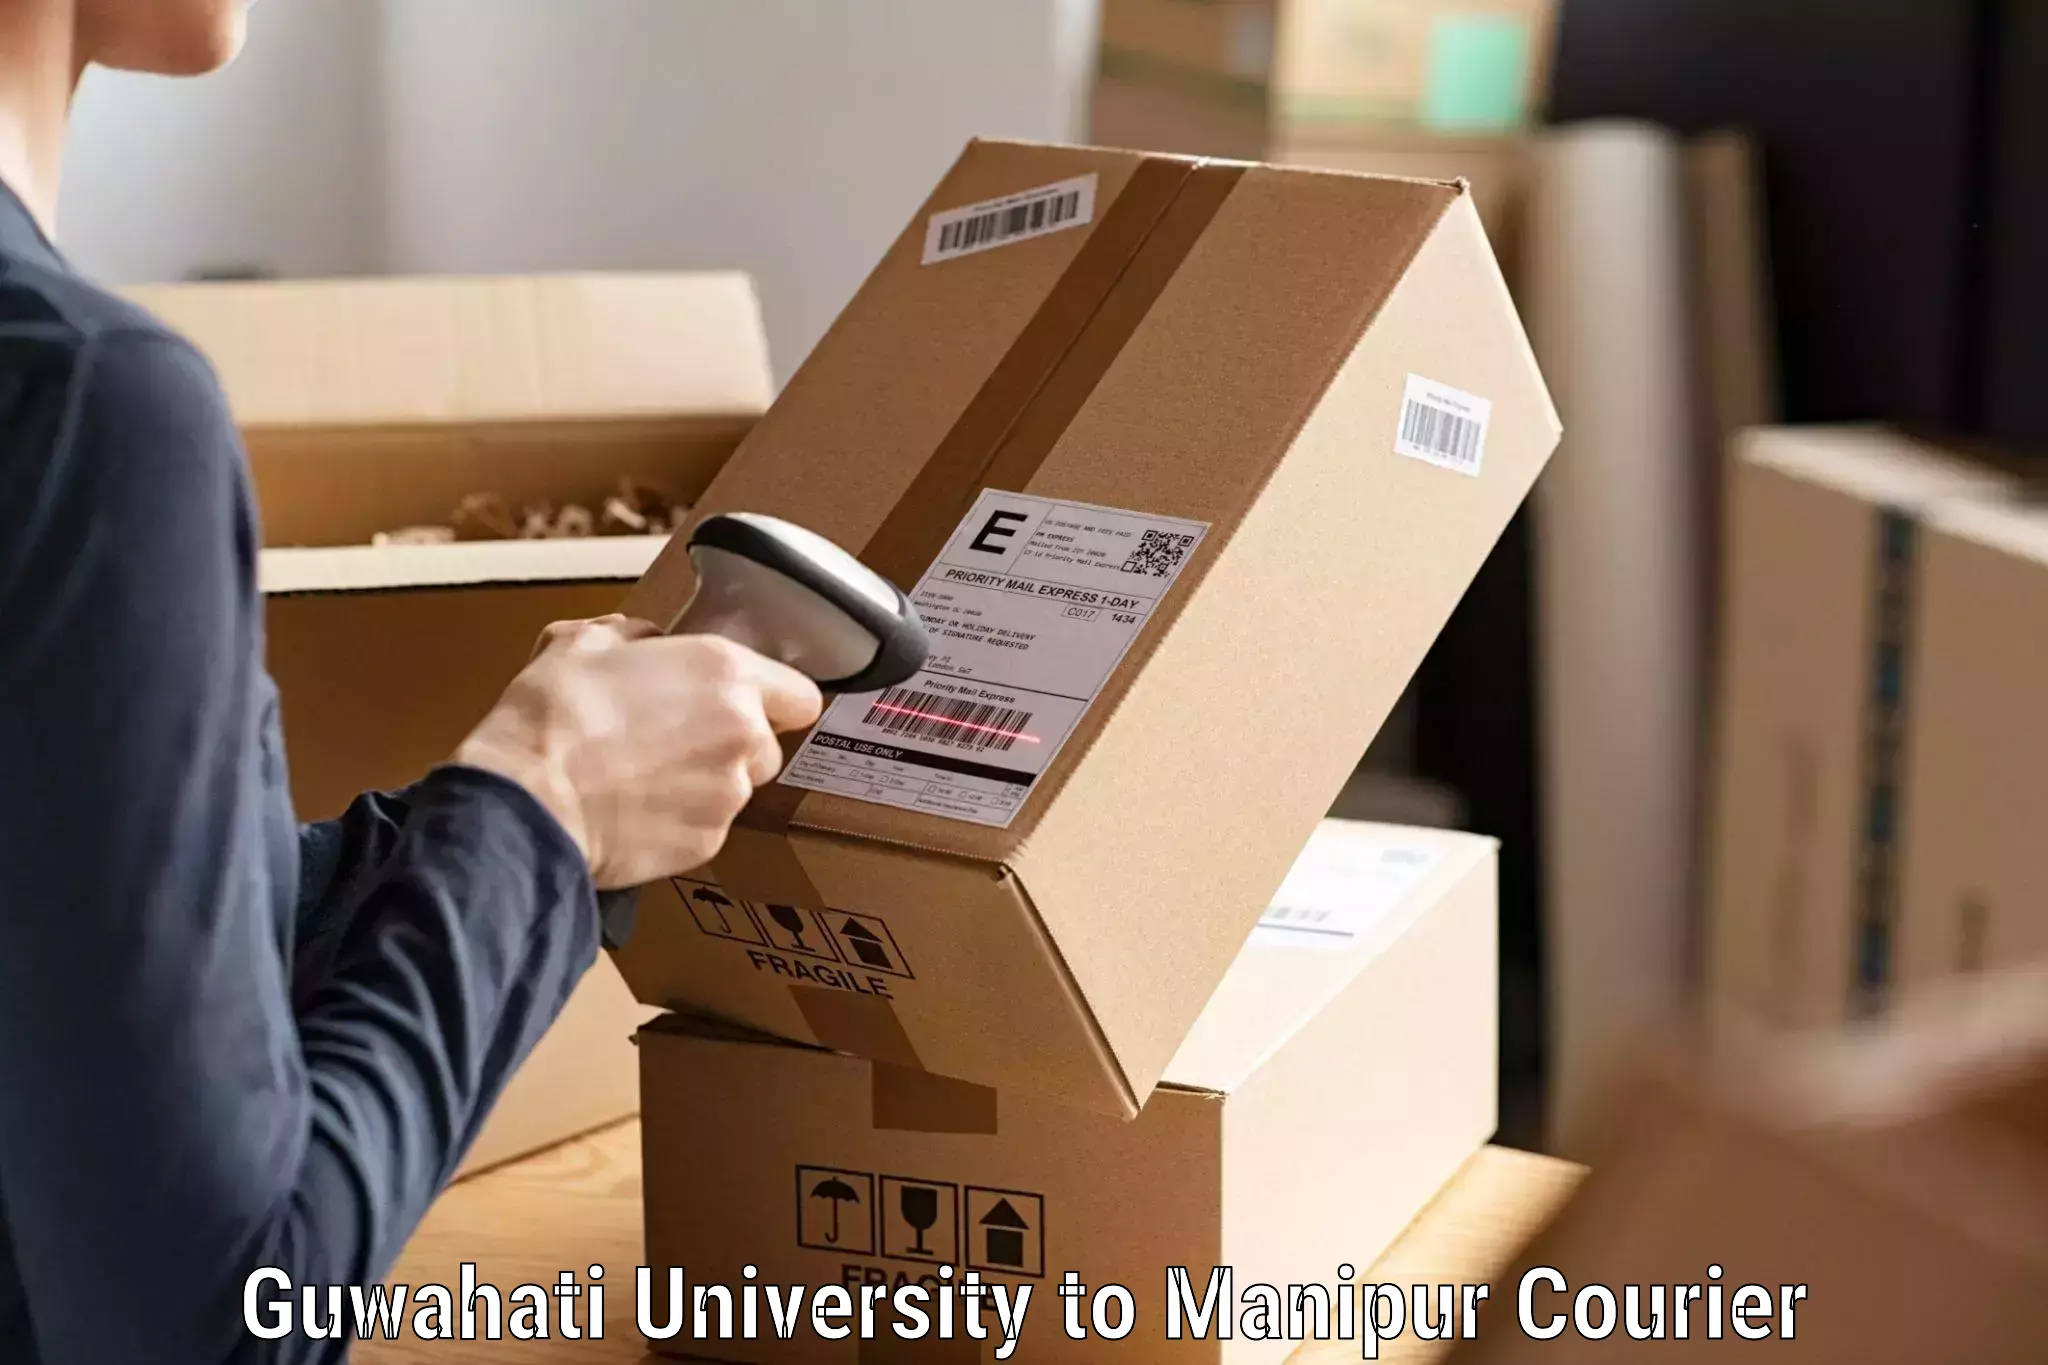 Heavy parcel delivery Guwahati University to Chandel